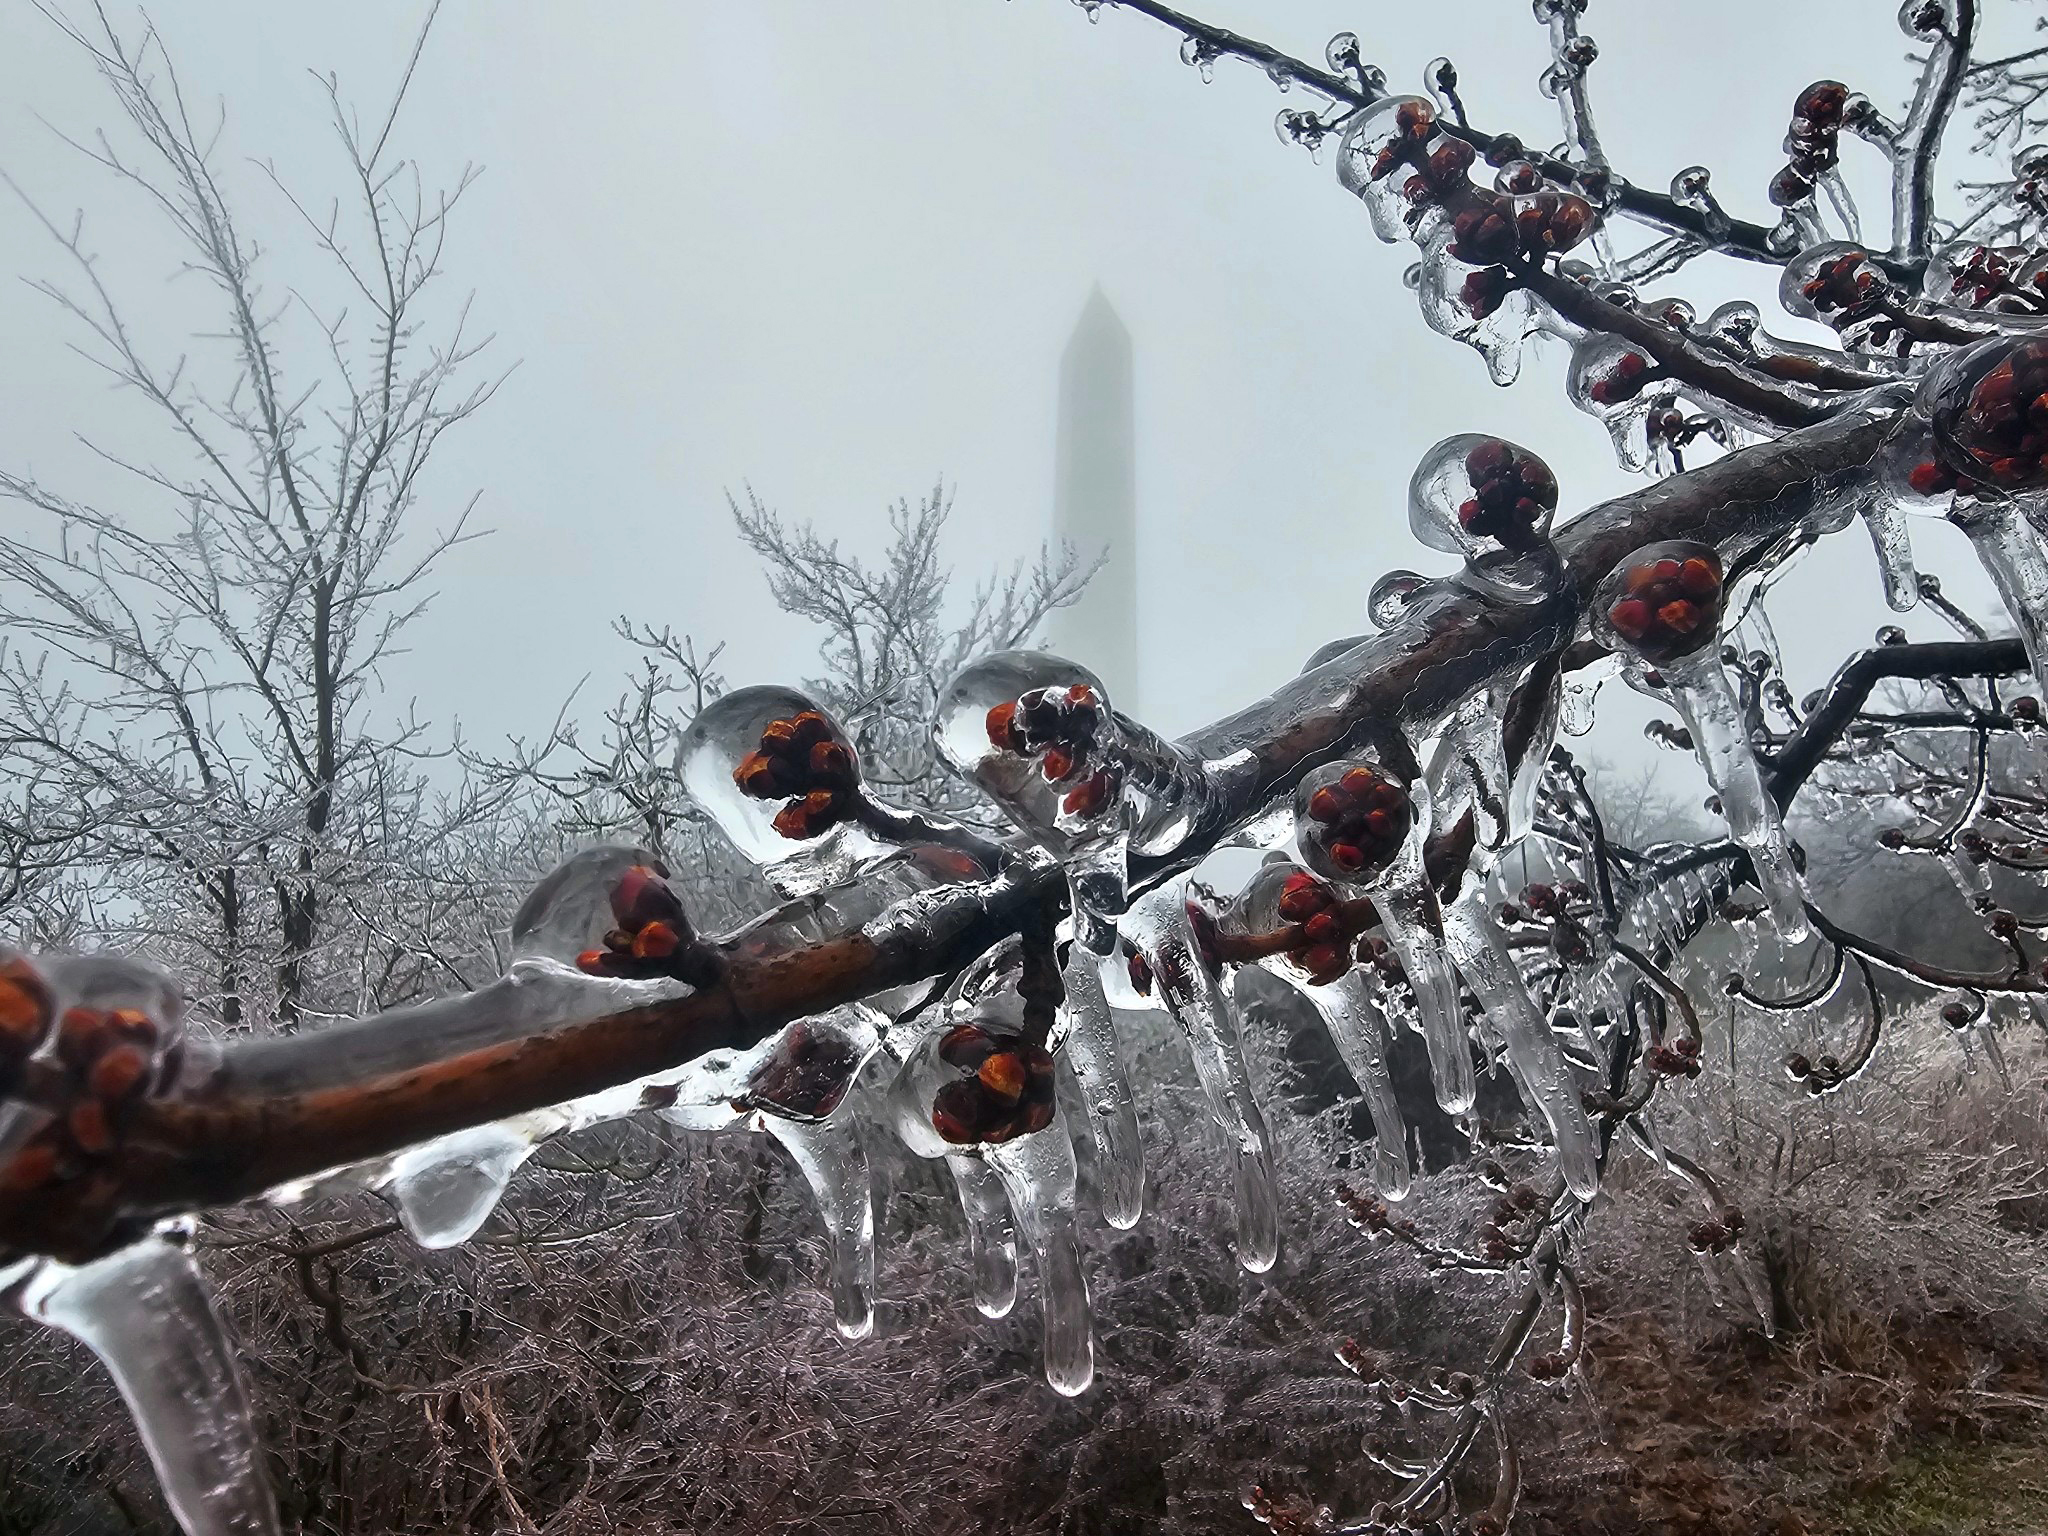 Ice-encased branch with High Point Monument in the background resulting from freezing rain on the morning of March 23rd (courtesy of Shawn Viggiano).